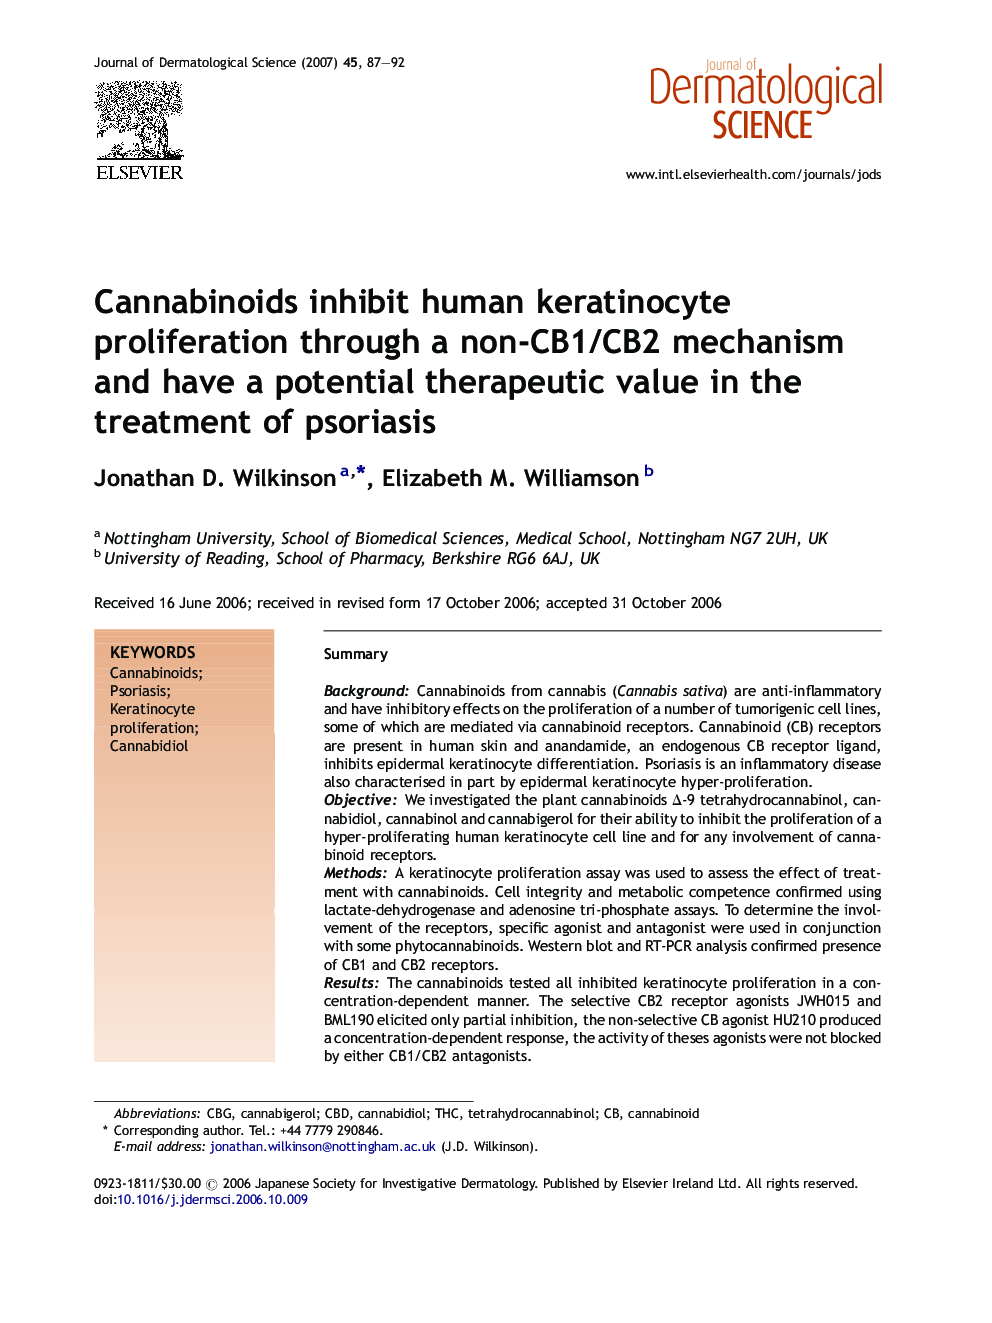 Cannabinoids inhibit human keratinocyte proliferation through a non-CB1/CB2 mechanism and have a potential therapeutic value in the treatment of psoriasis